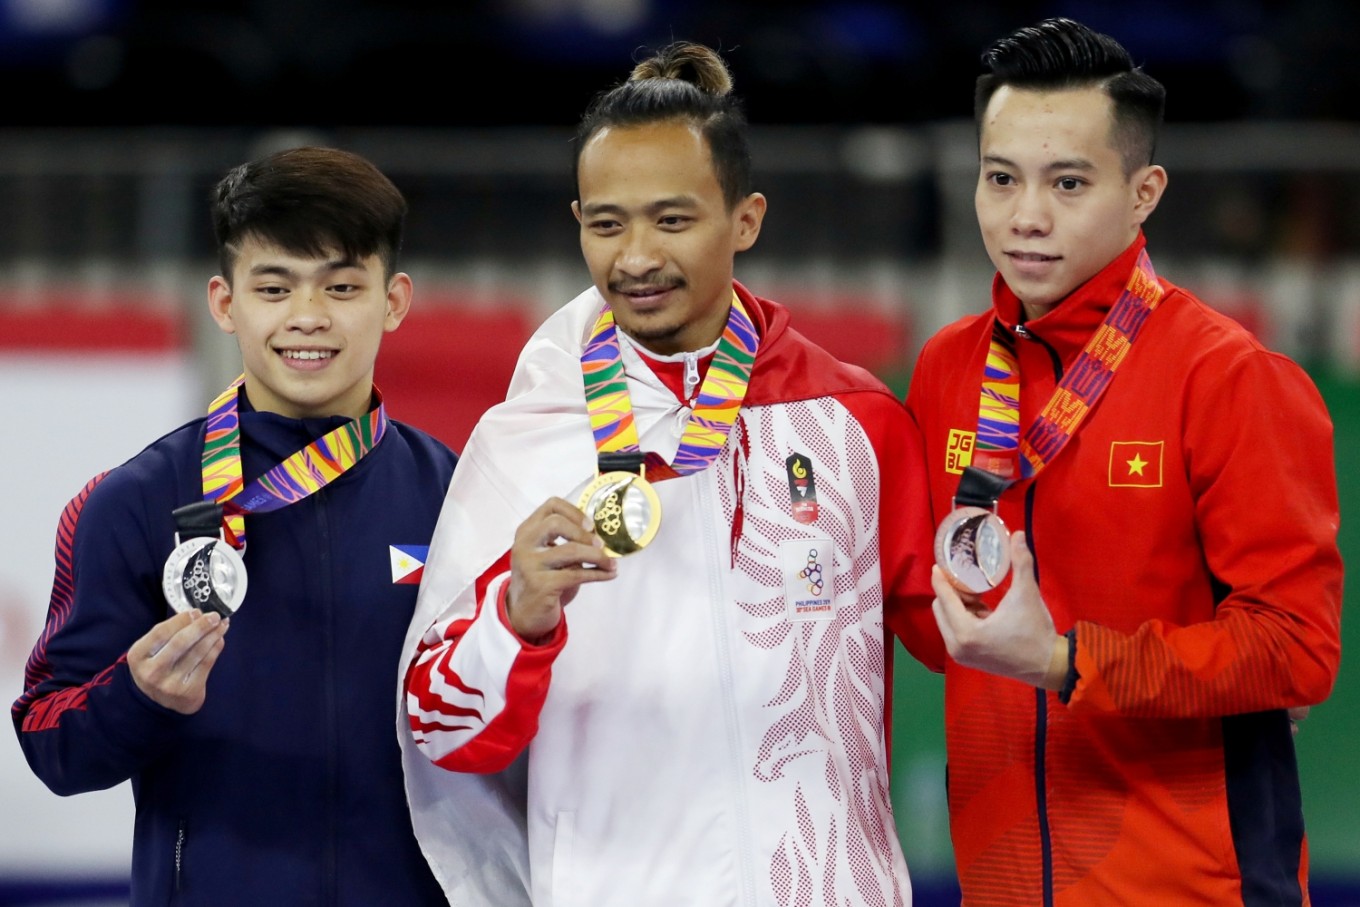 SEA Games Indonesian gymnast Agus shines in golden 